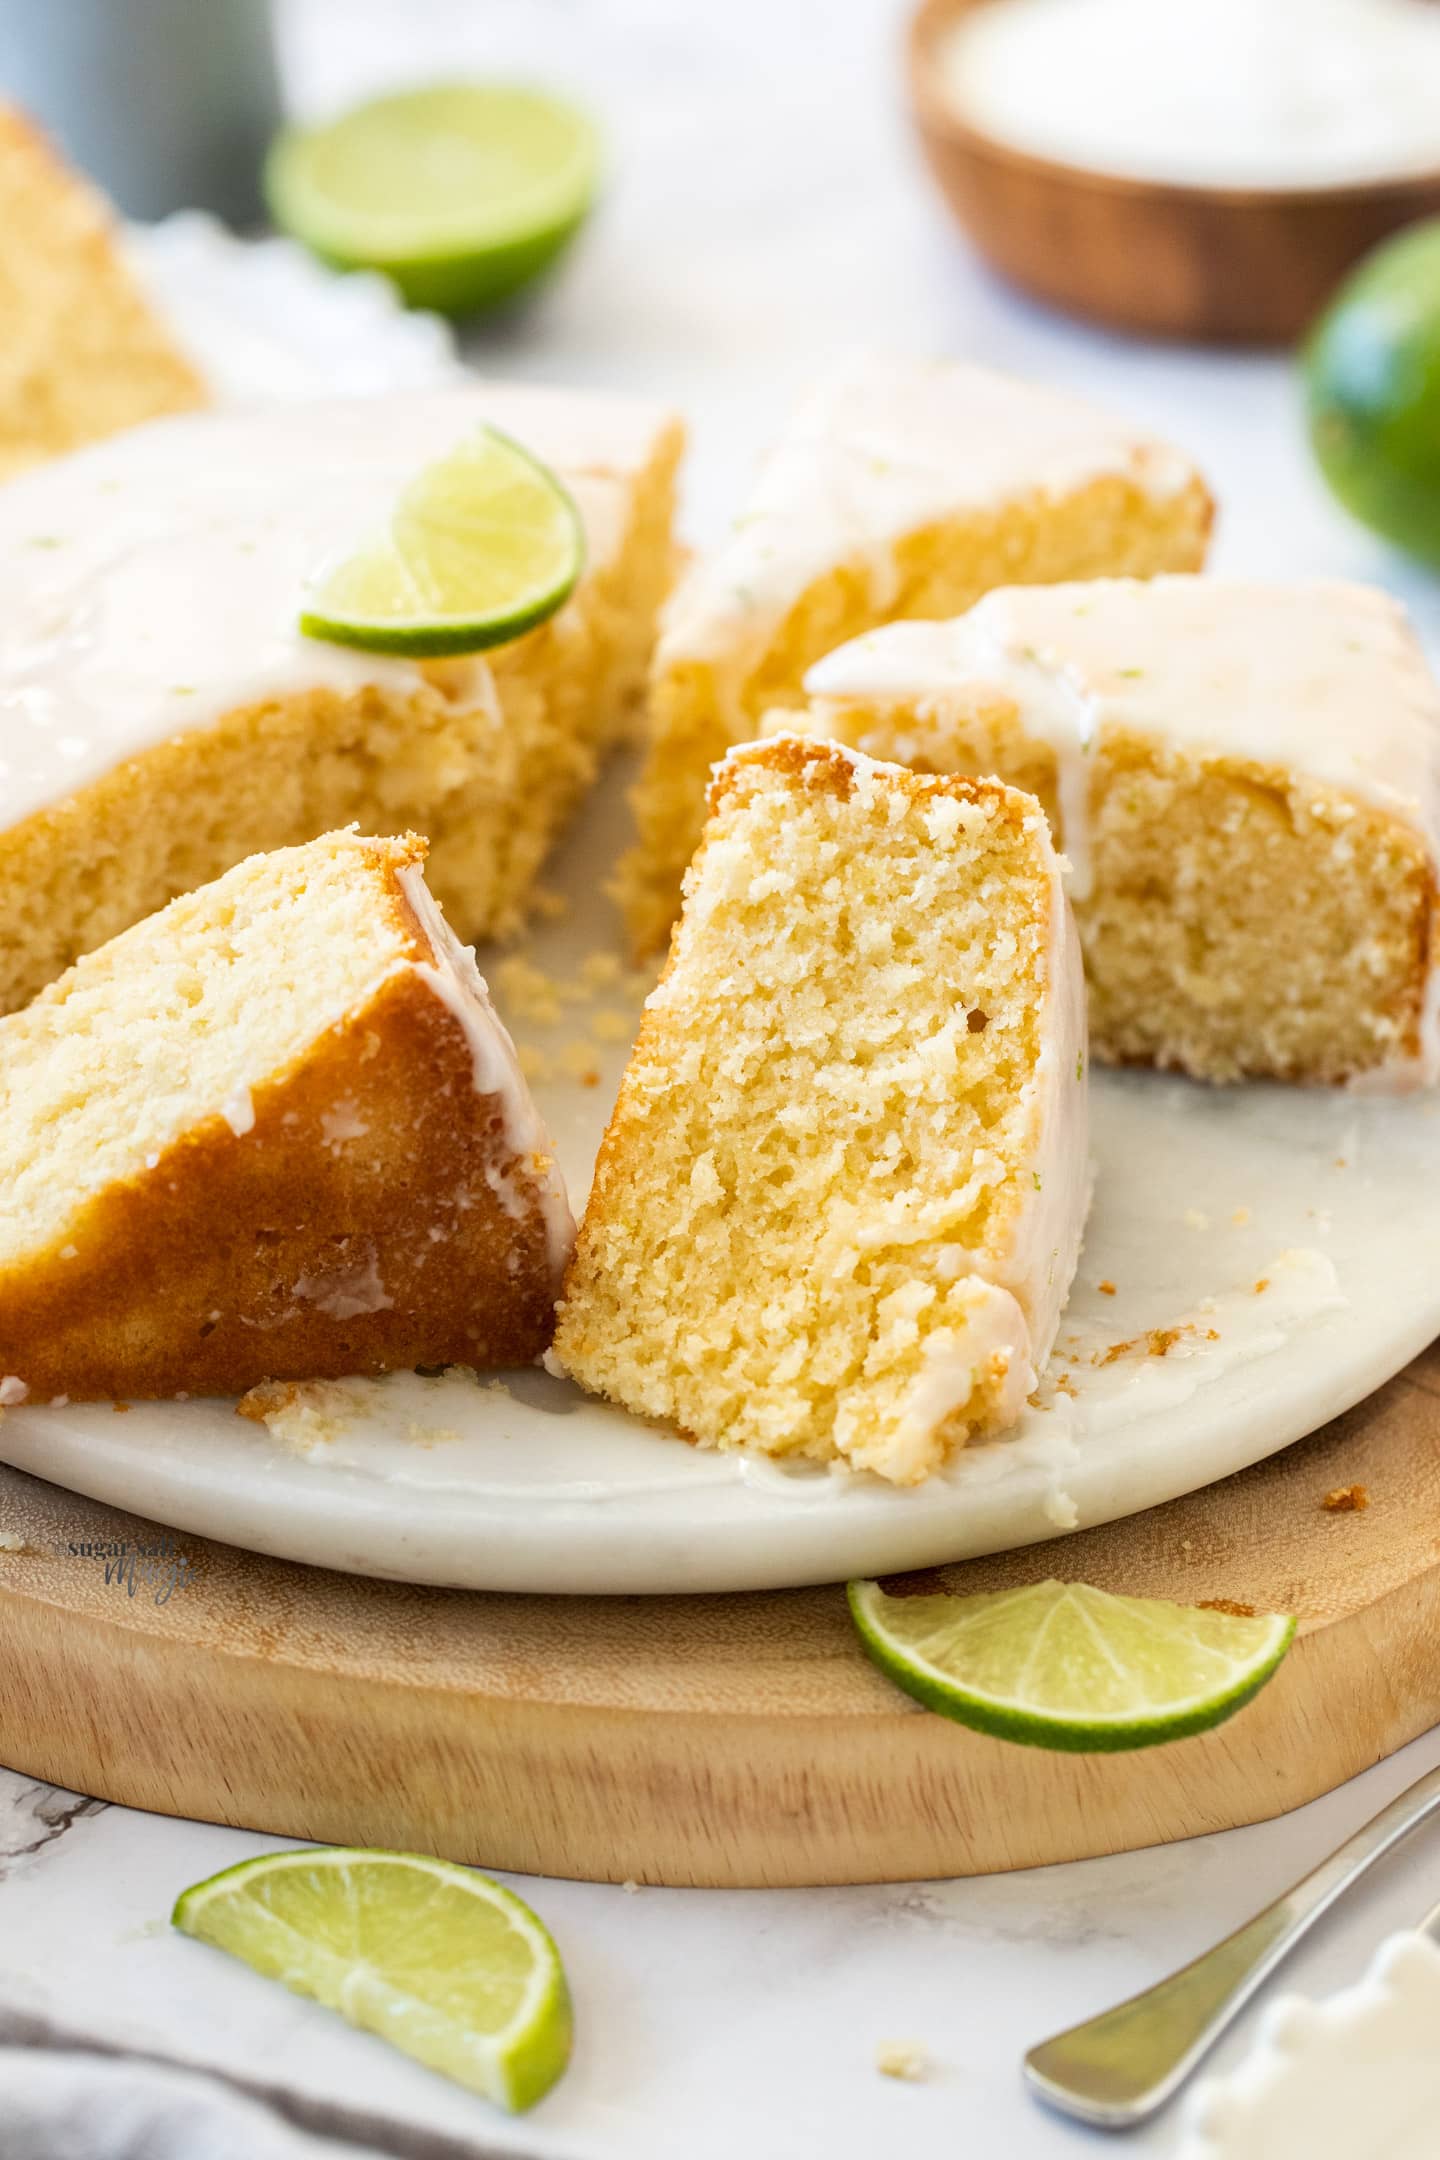 Closeup of a slice of lime and coconut cake.